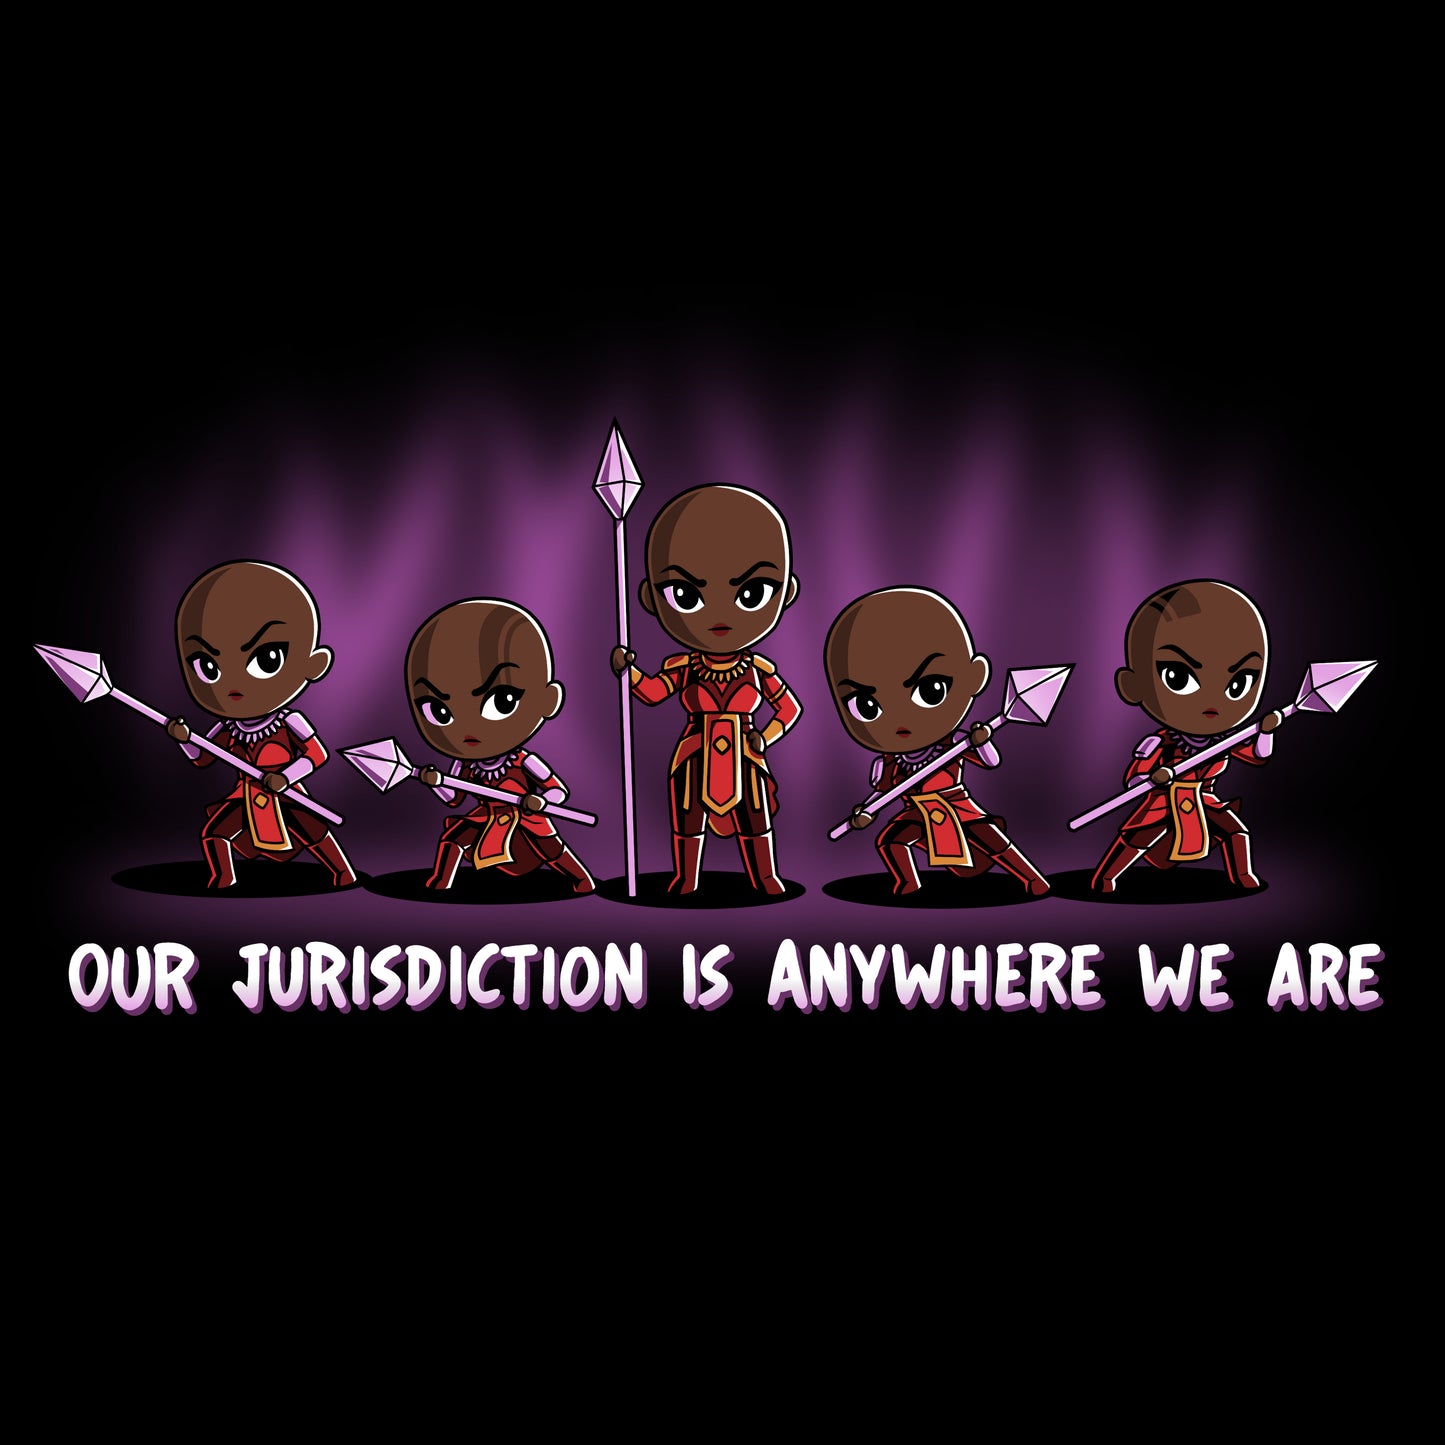 Officially licensed Marvel products featuring The Falcon and the Winter Soldier and Dora Milaje, including "Our Jurisdiction is Anywhere We Are".